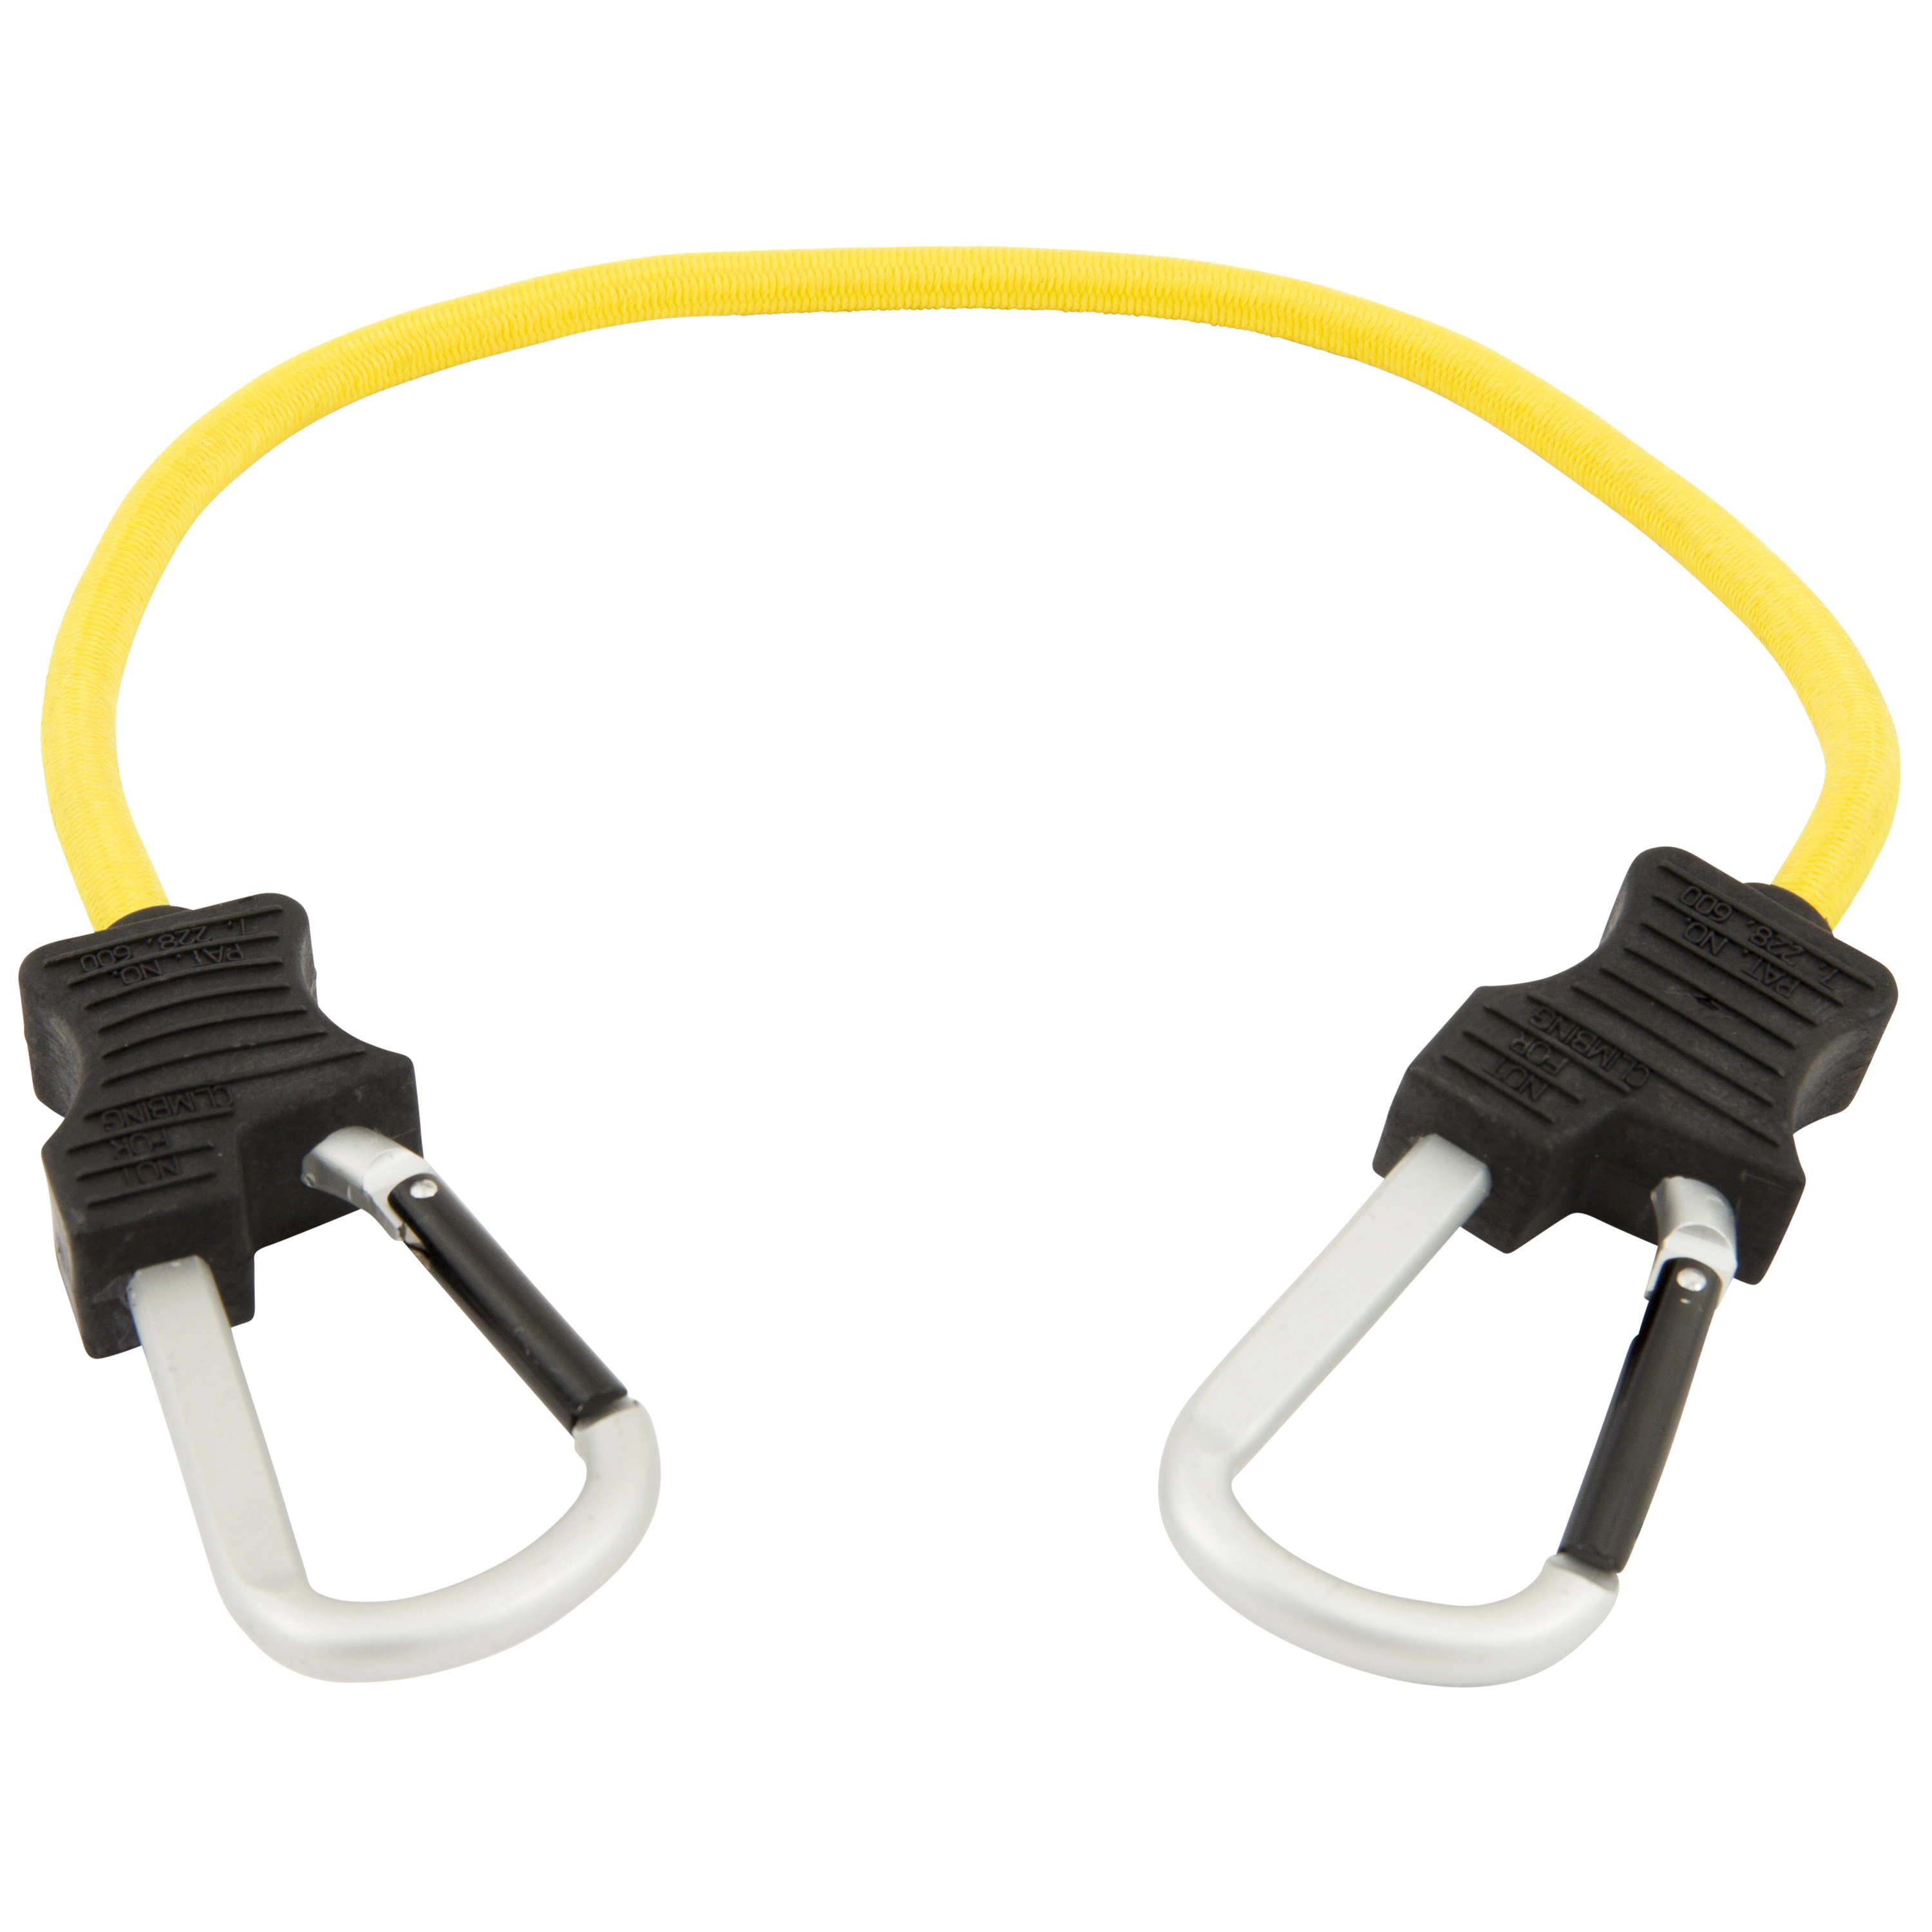 24" Carabiner Bungee Cord variant image view